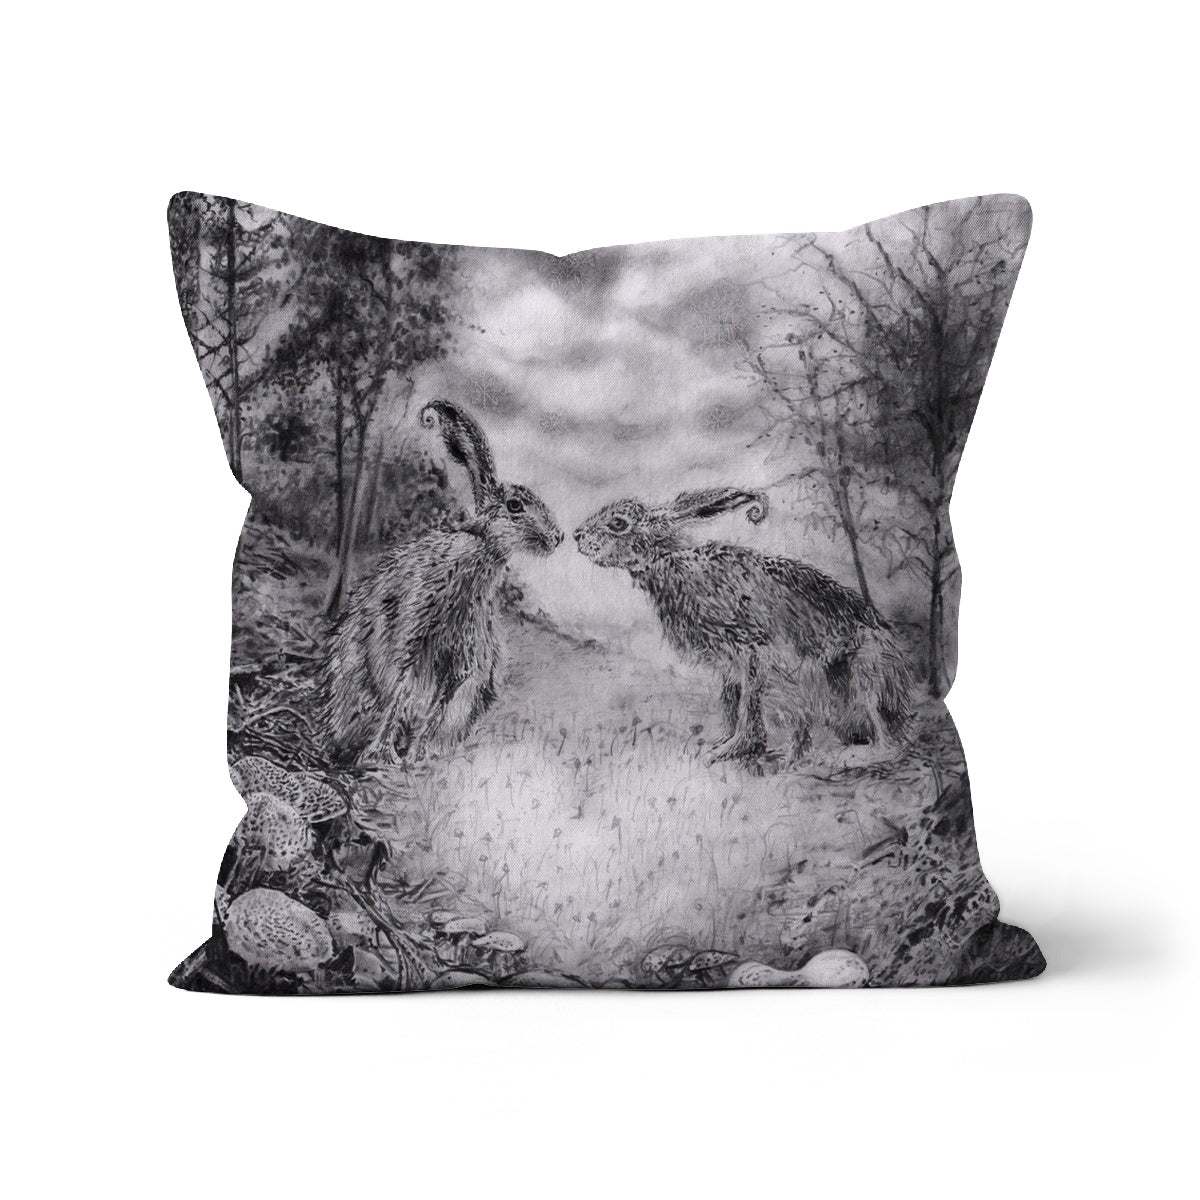 'Loved-up Hares, As The First Frost Falls' - Cushion